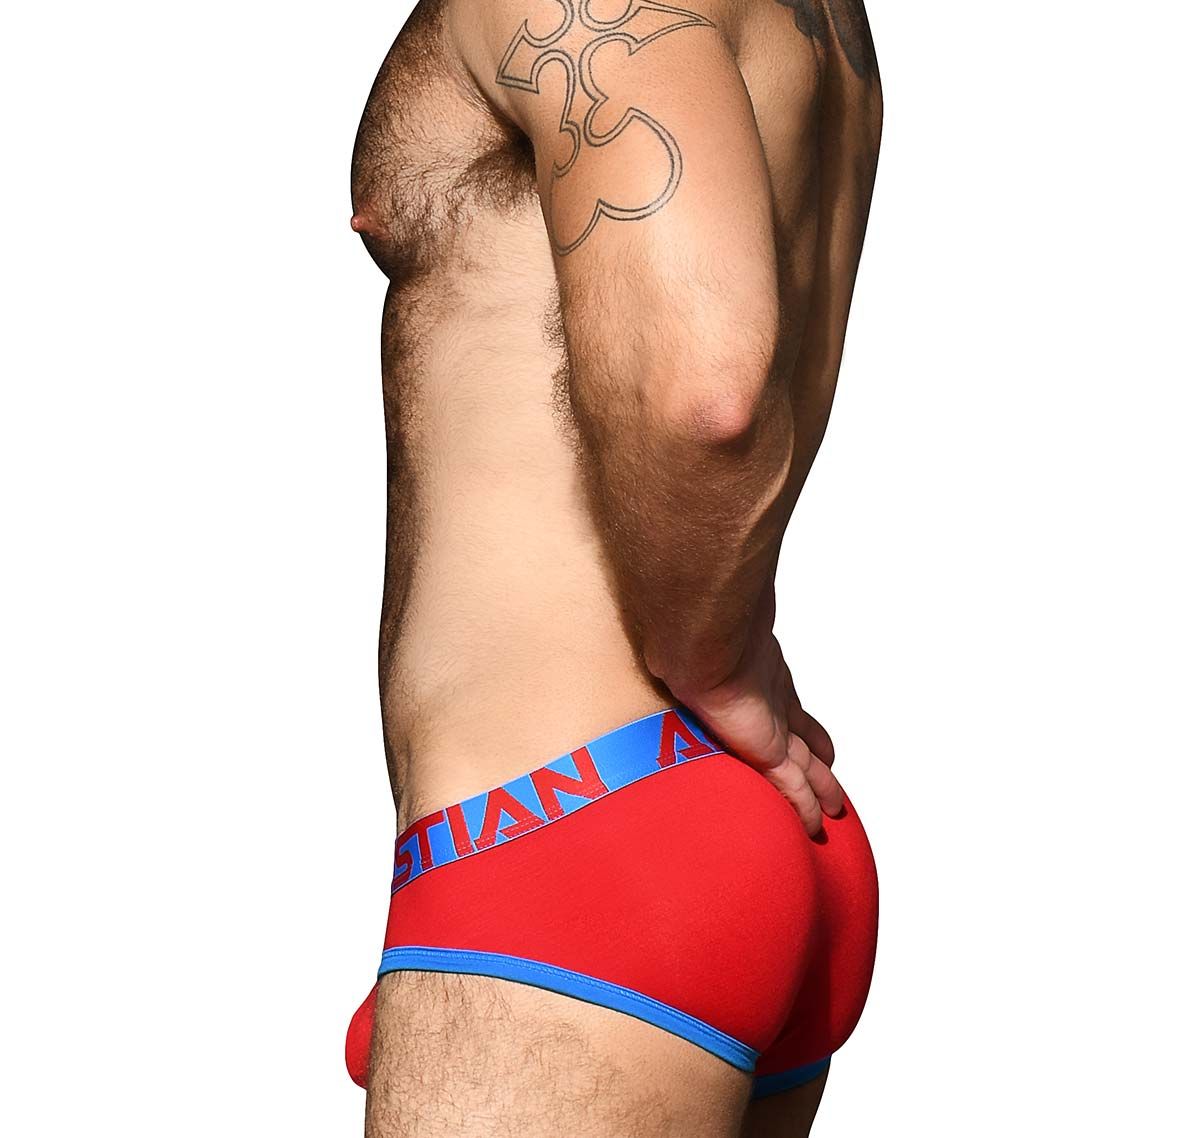 Andrew Christian Slip COOLFLEX MODAL ACTIVE BRIEF w/ Show-It 92522, rouge